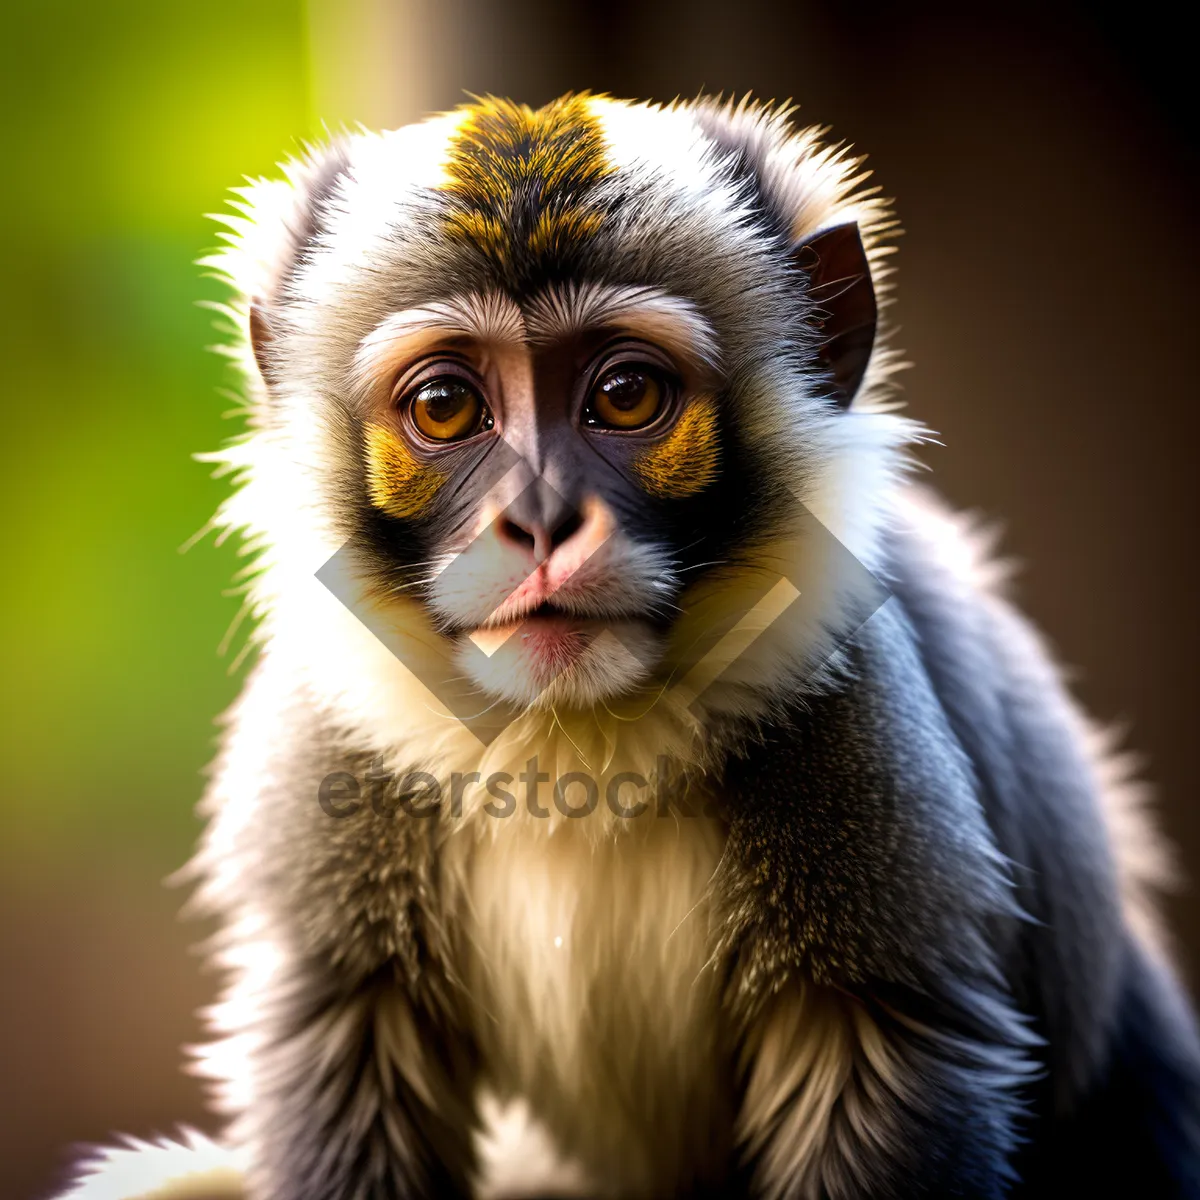 Picture of Cute baby monkey portrait in the wild